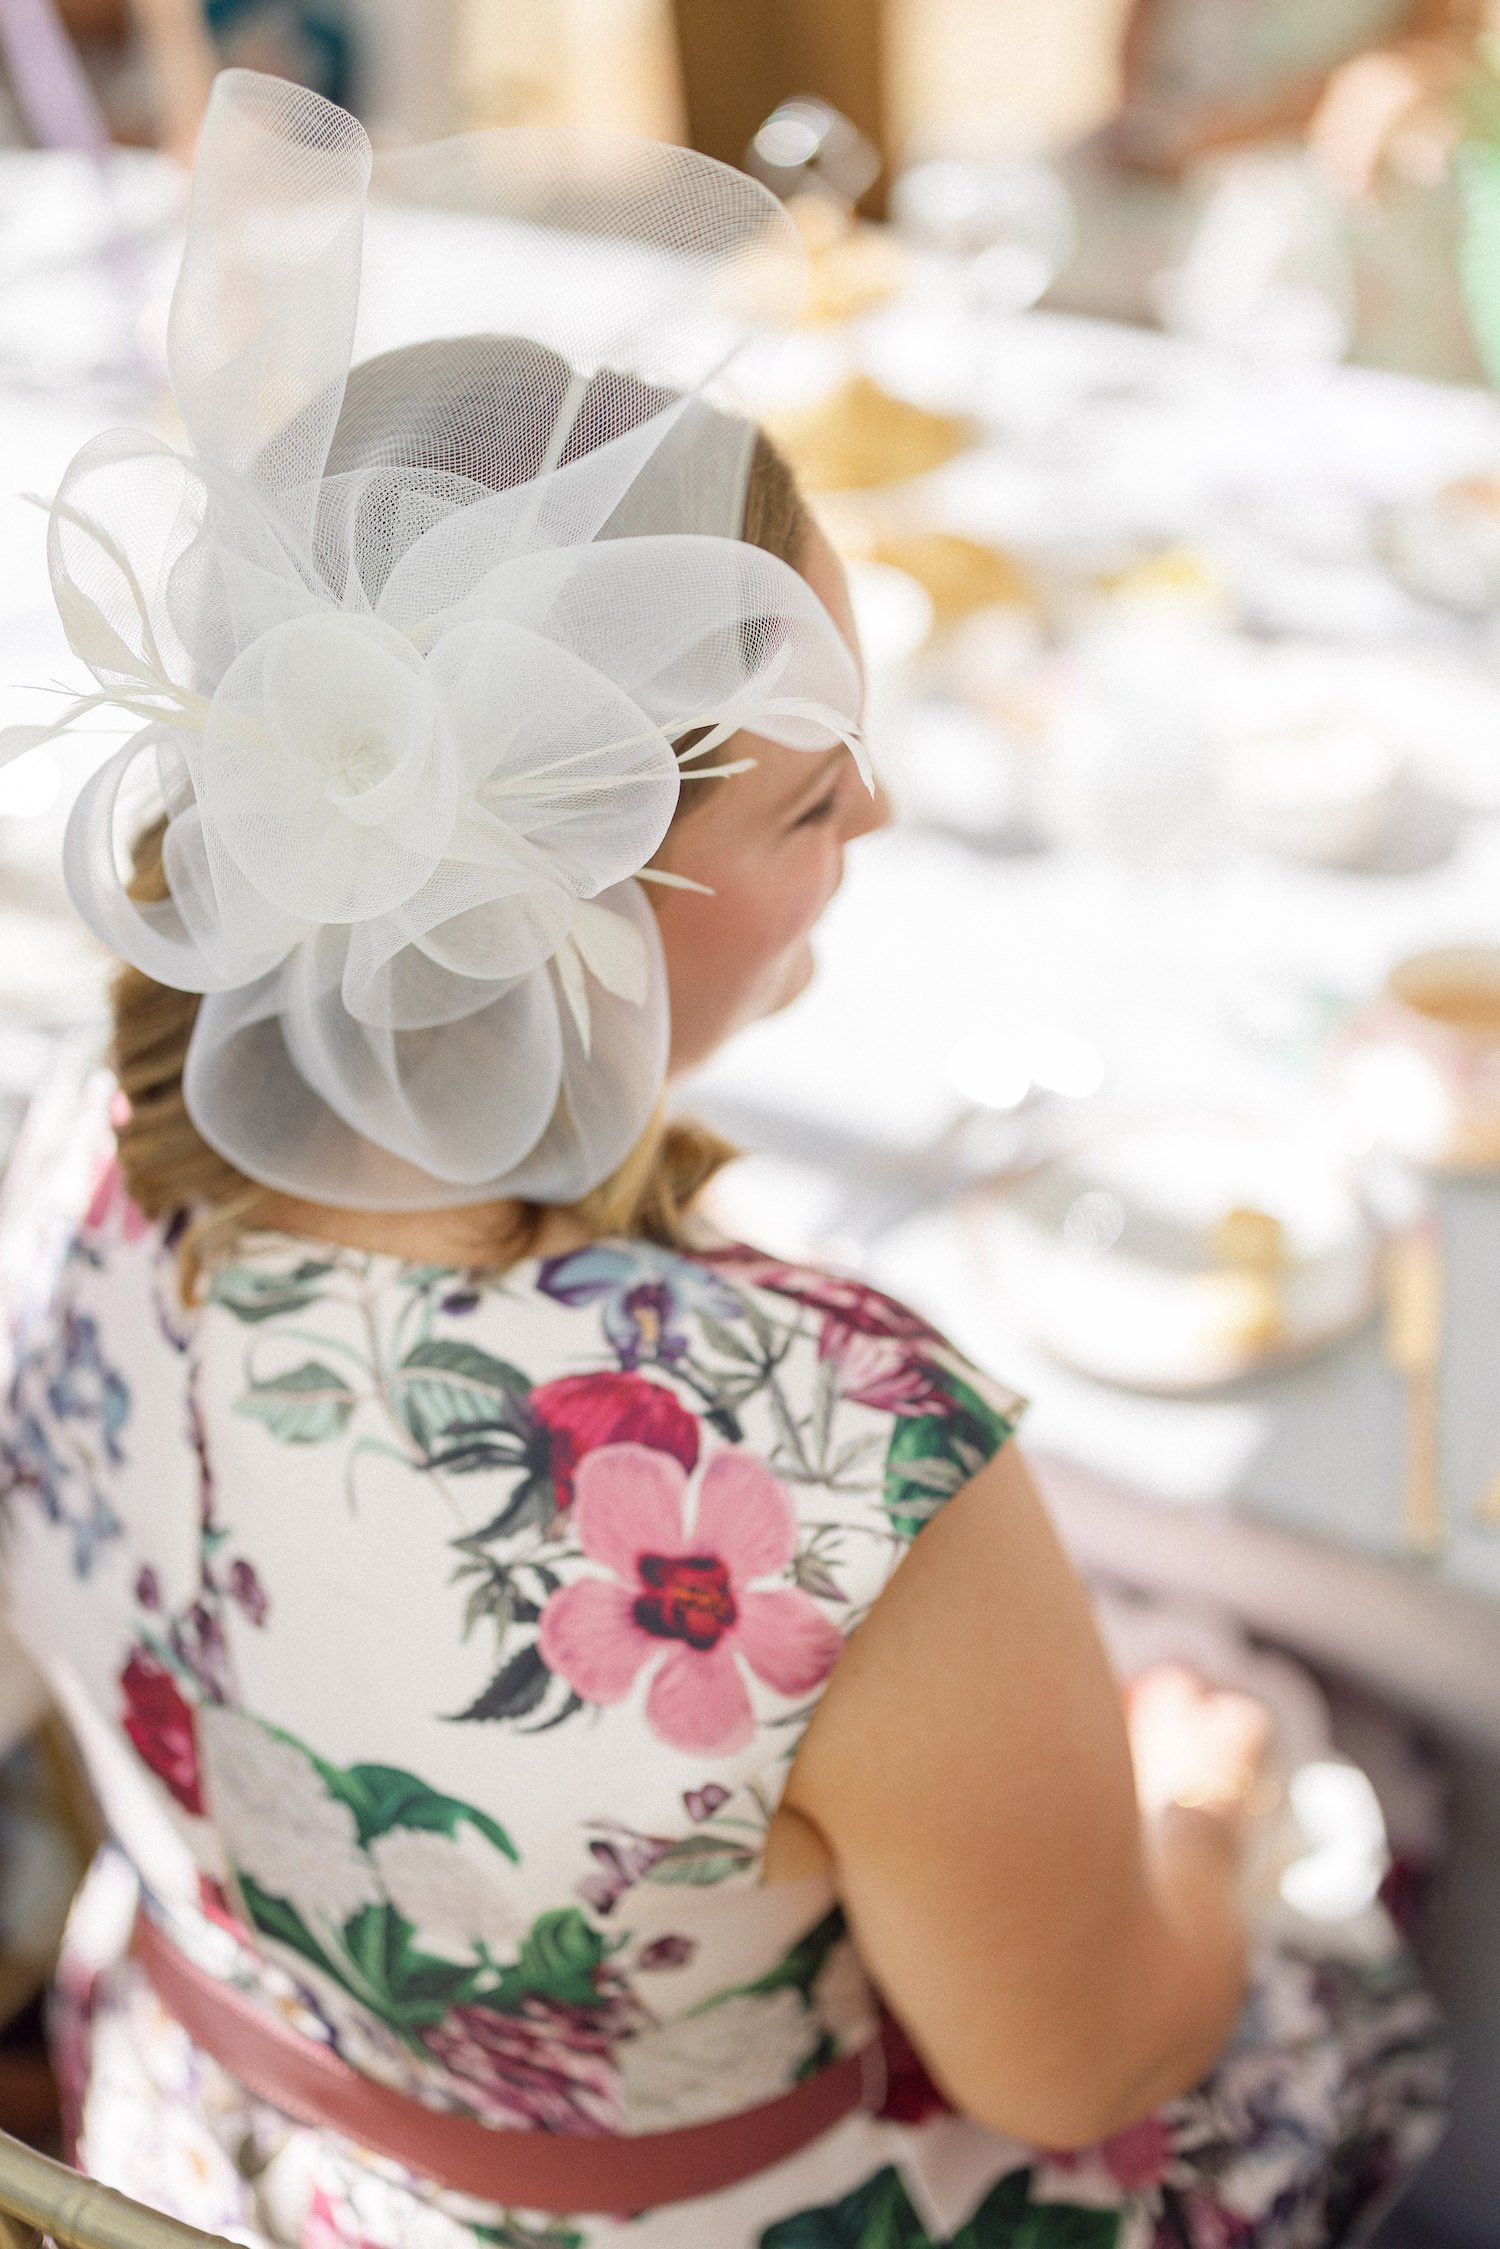 Bride's hat at British Tea Themed Wedding Welcome Party